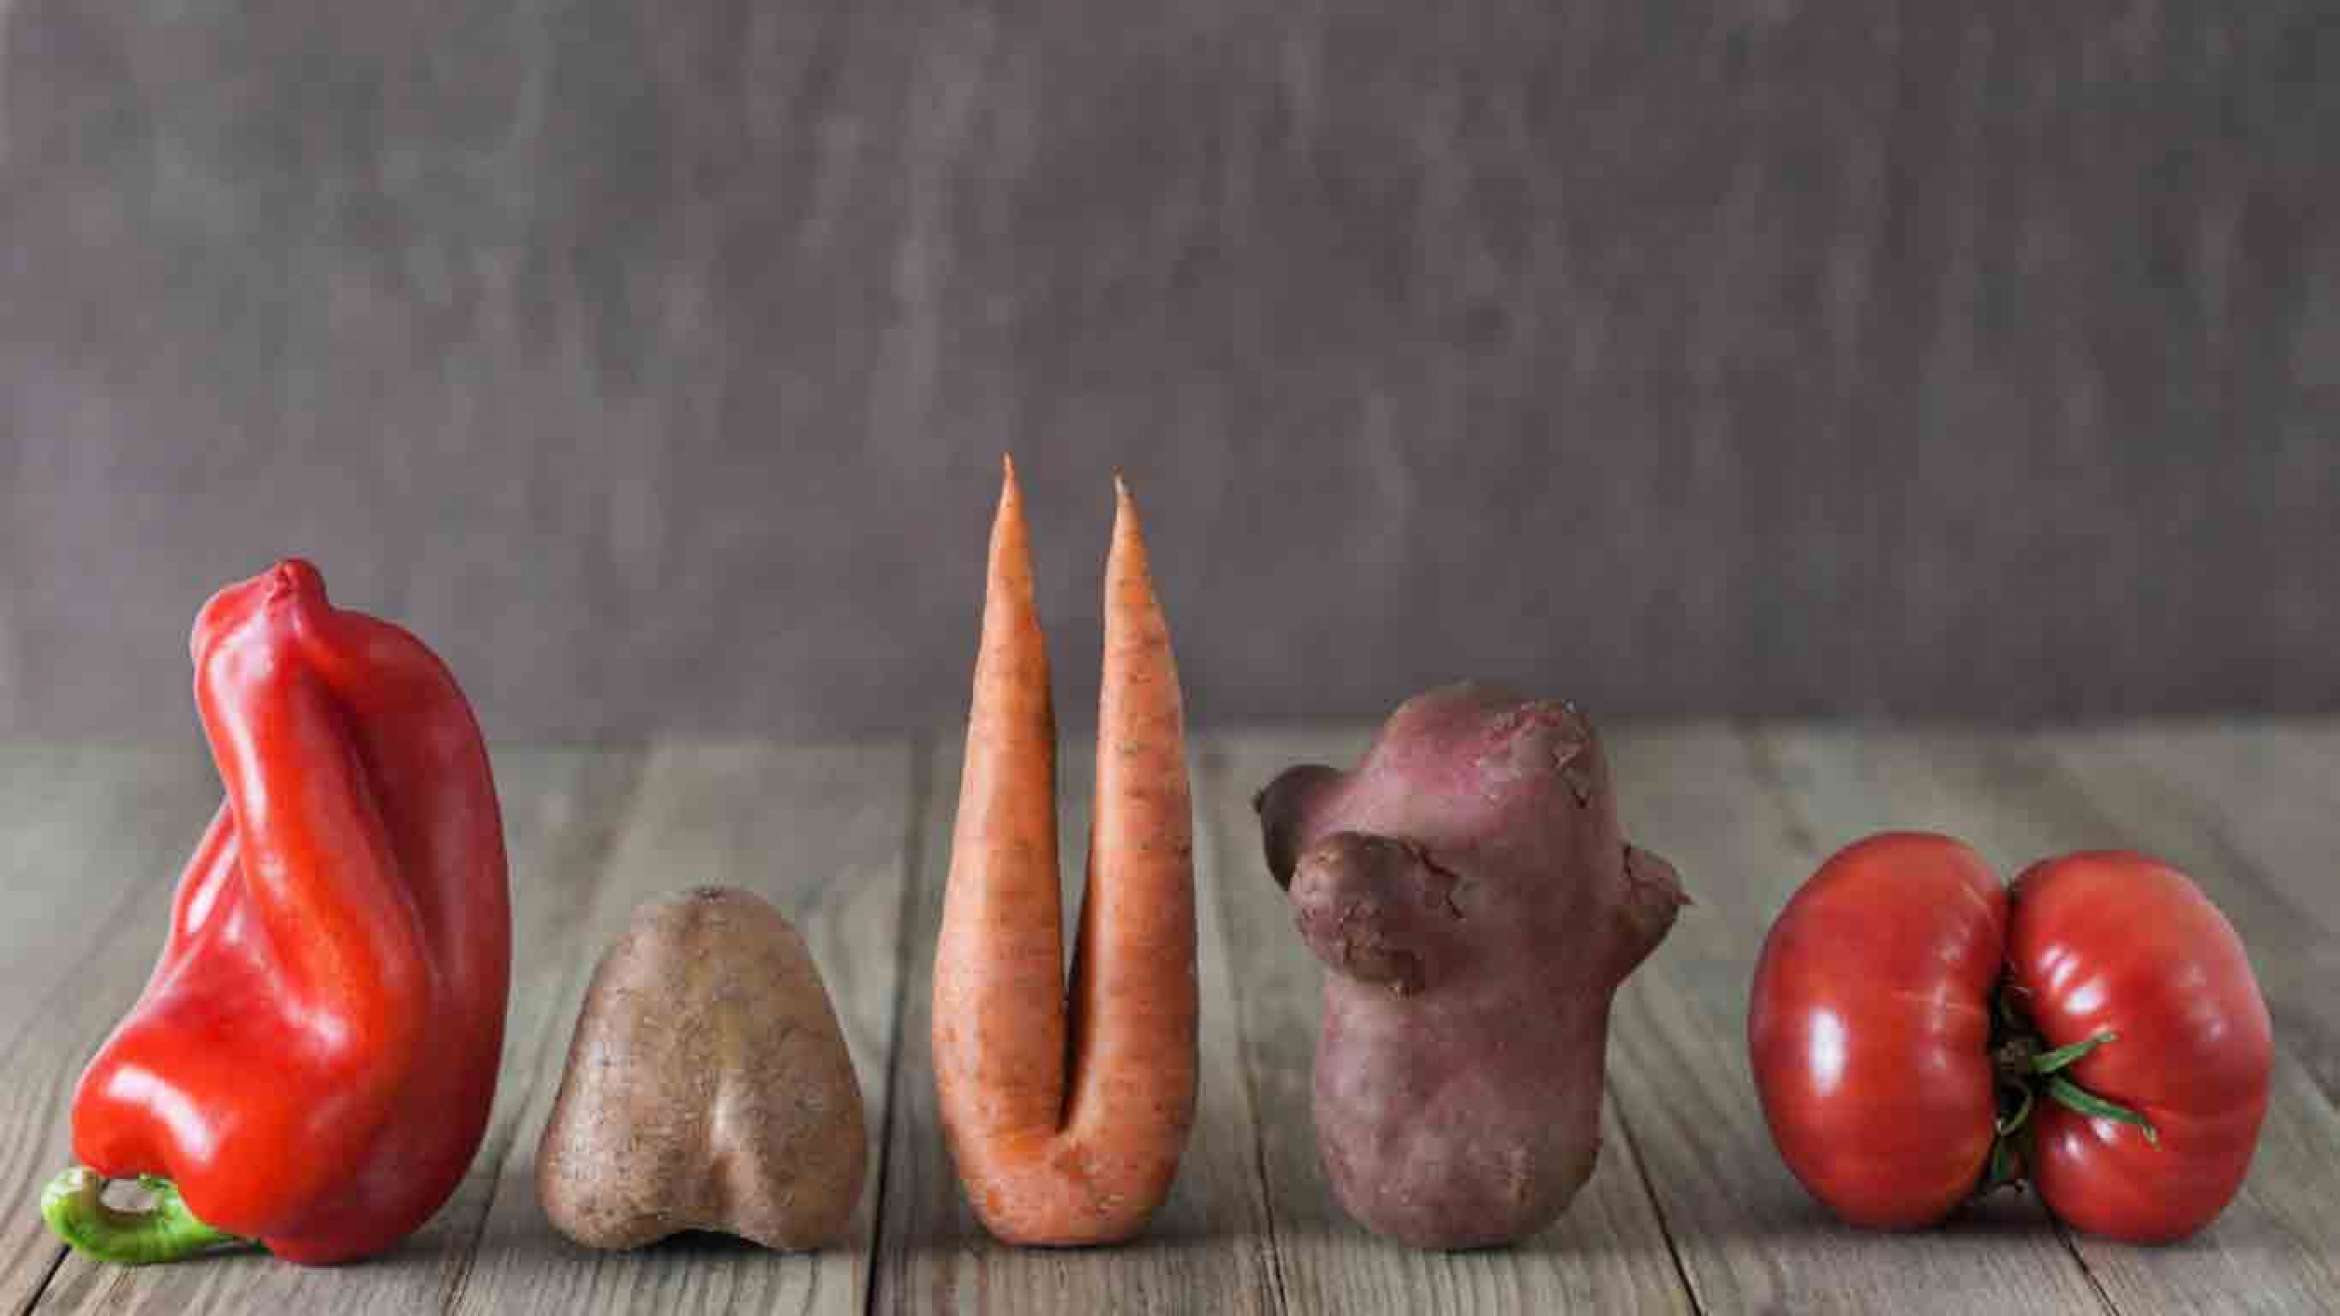 A bell pepper, potato, carrot with two "legs", sweet potato, and a tomato lined up on a wooden table with a brown wall behind them. They are representing ugly vegetables, imperfect vegetables.